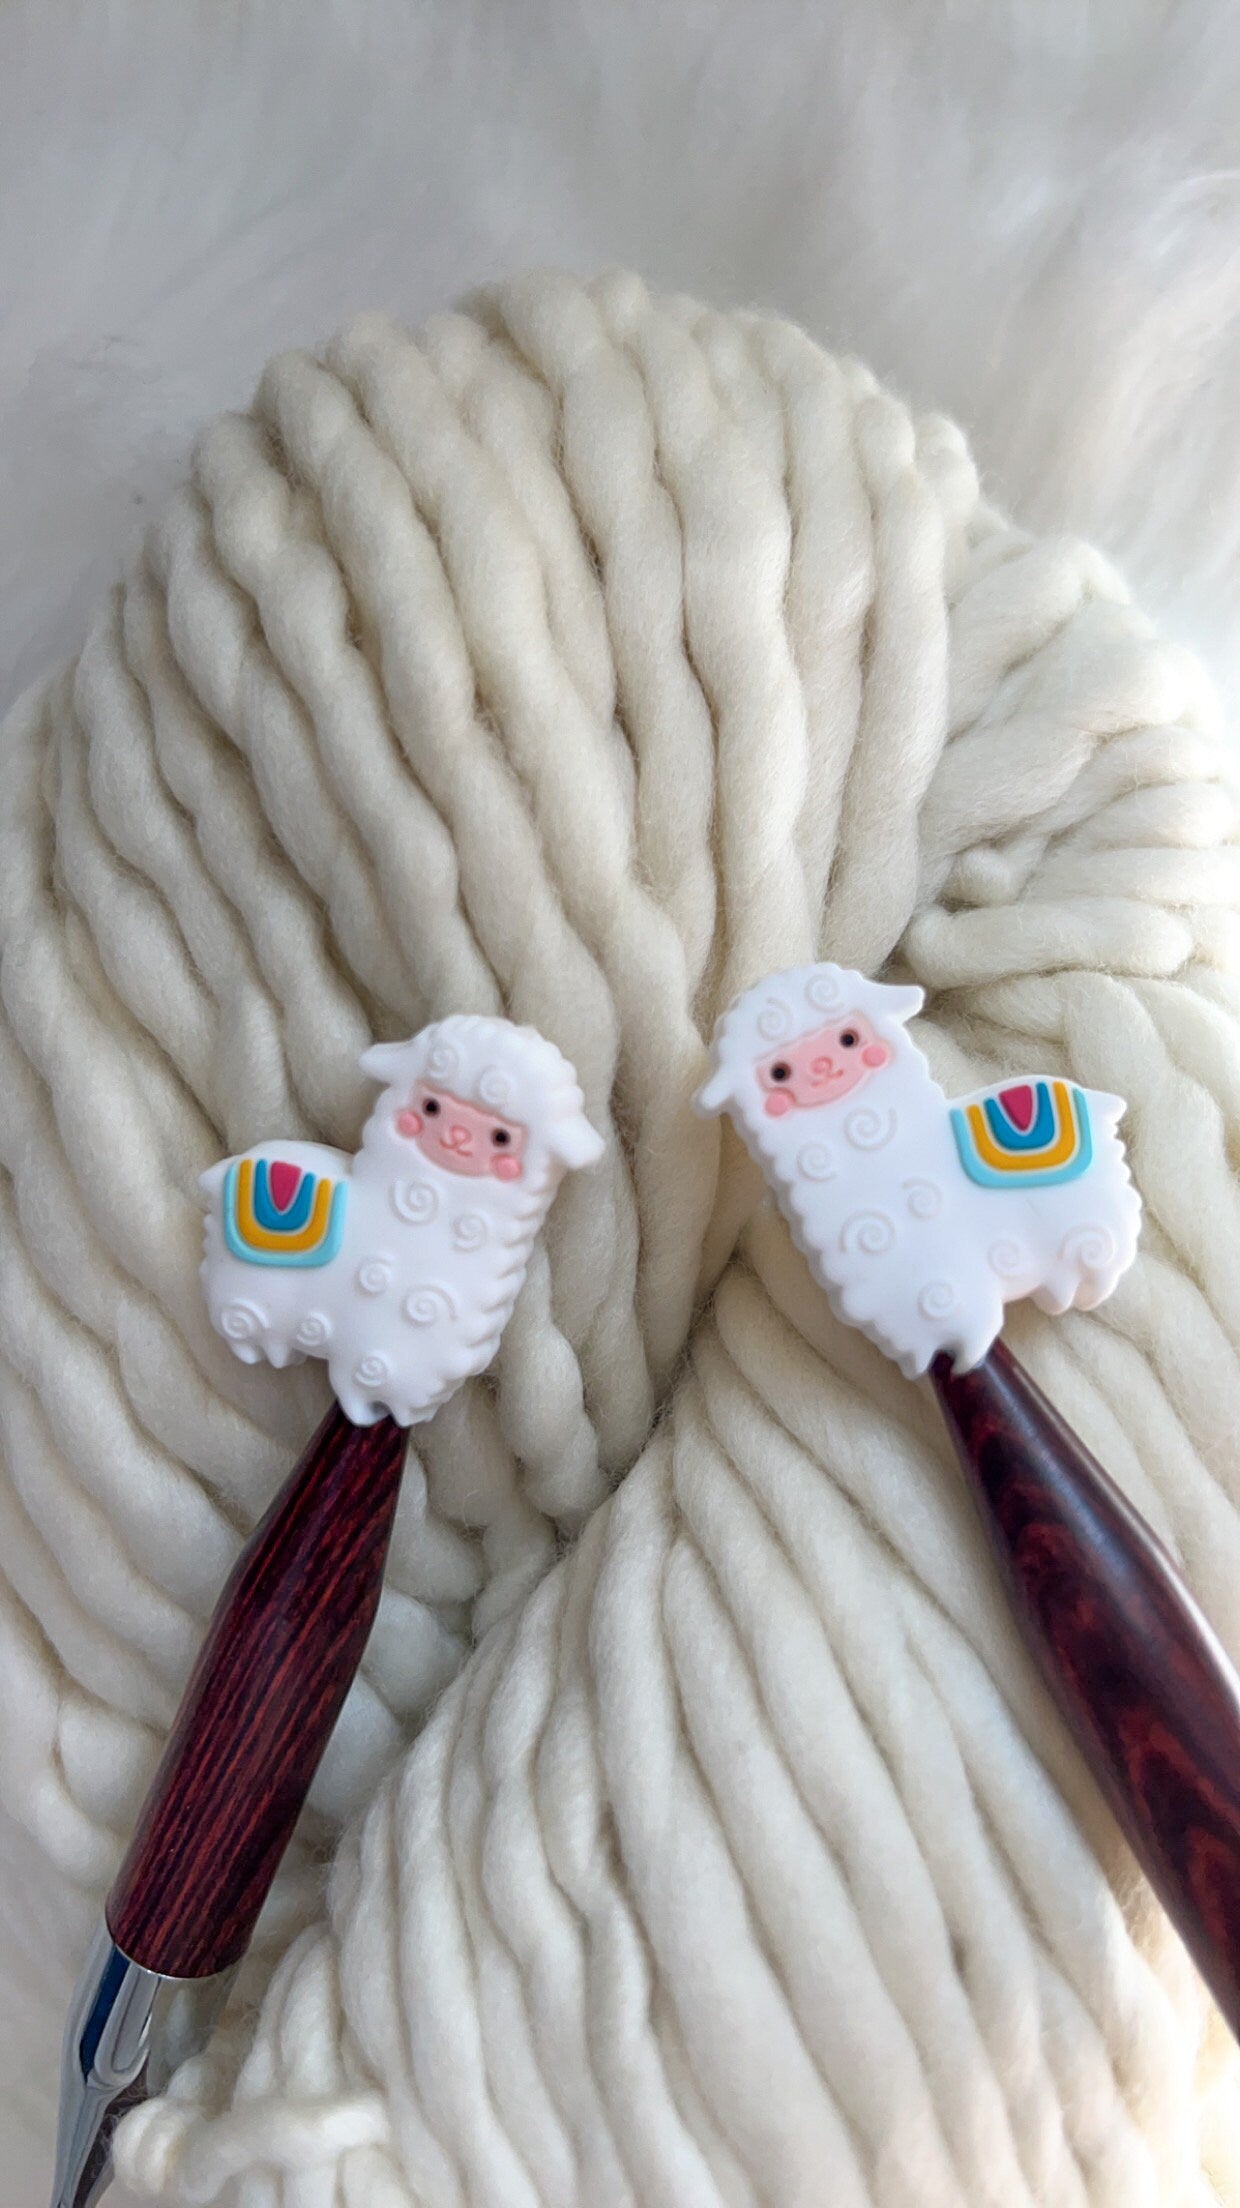 Llama Stitch Stoppers | Needle Protectors | Knitting Tool | Needle Stopper | Accessory | Maker Tool | Notions